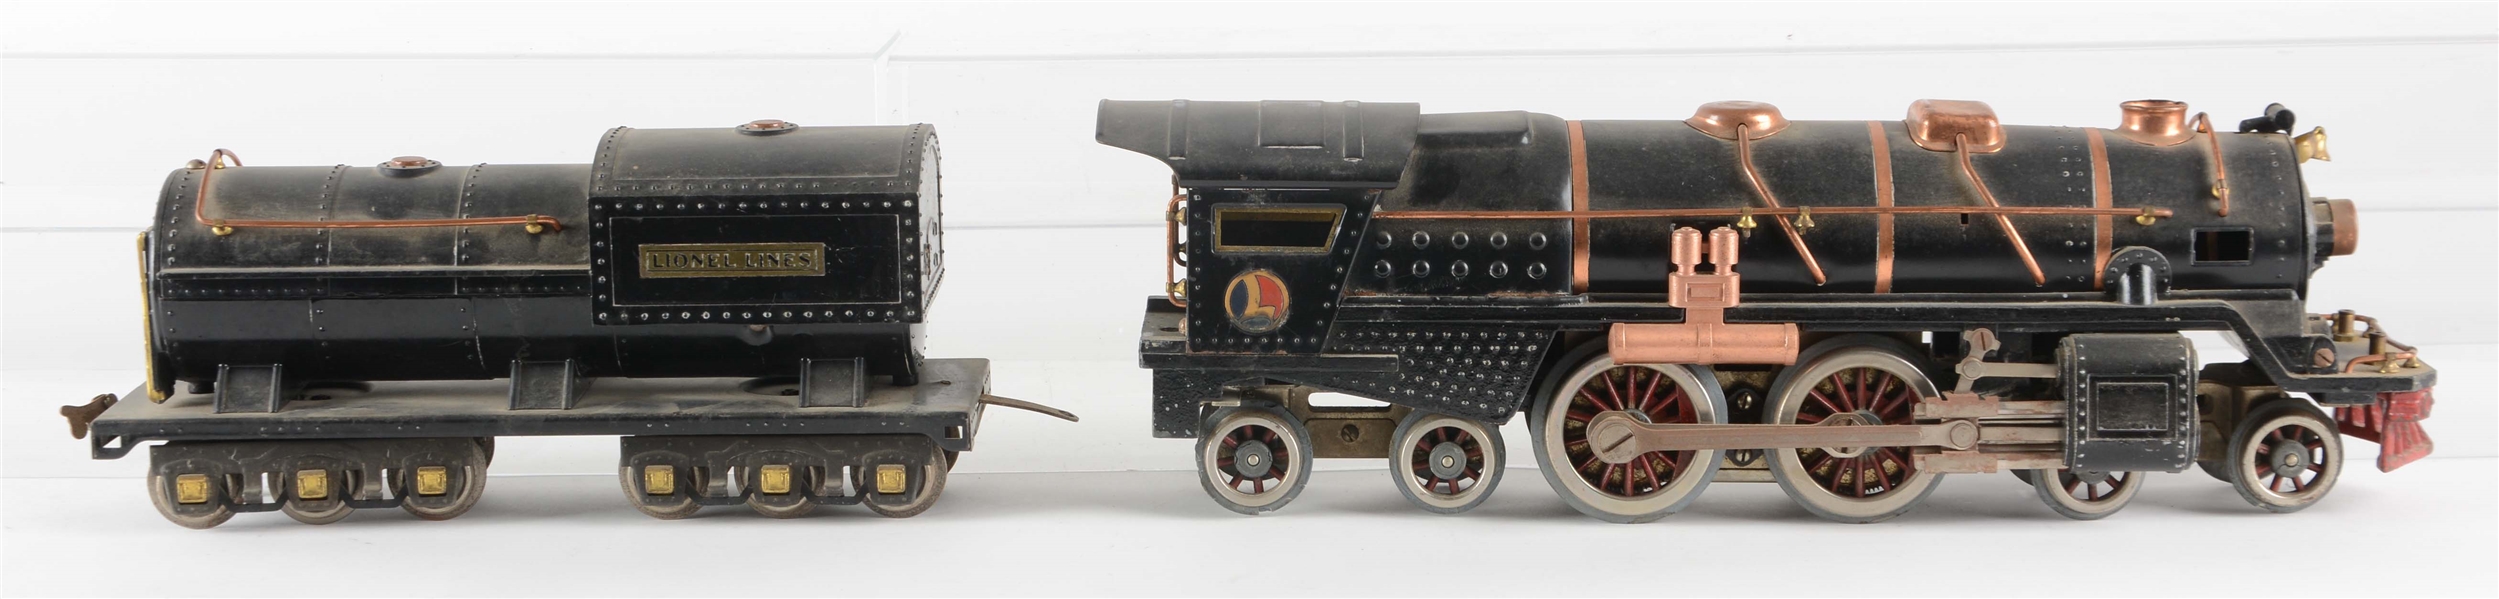 LOT OF 2: LIONEL 400 E IN STANDARD GAUGE TENDER & ENGINE WITH BOXES. 